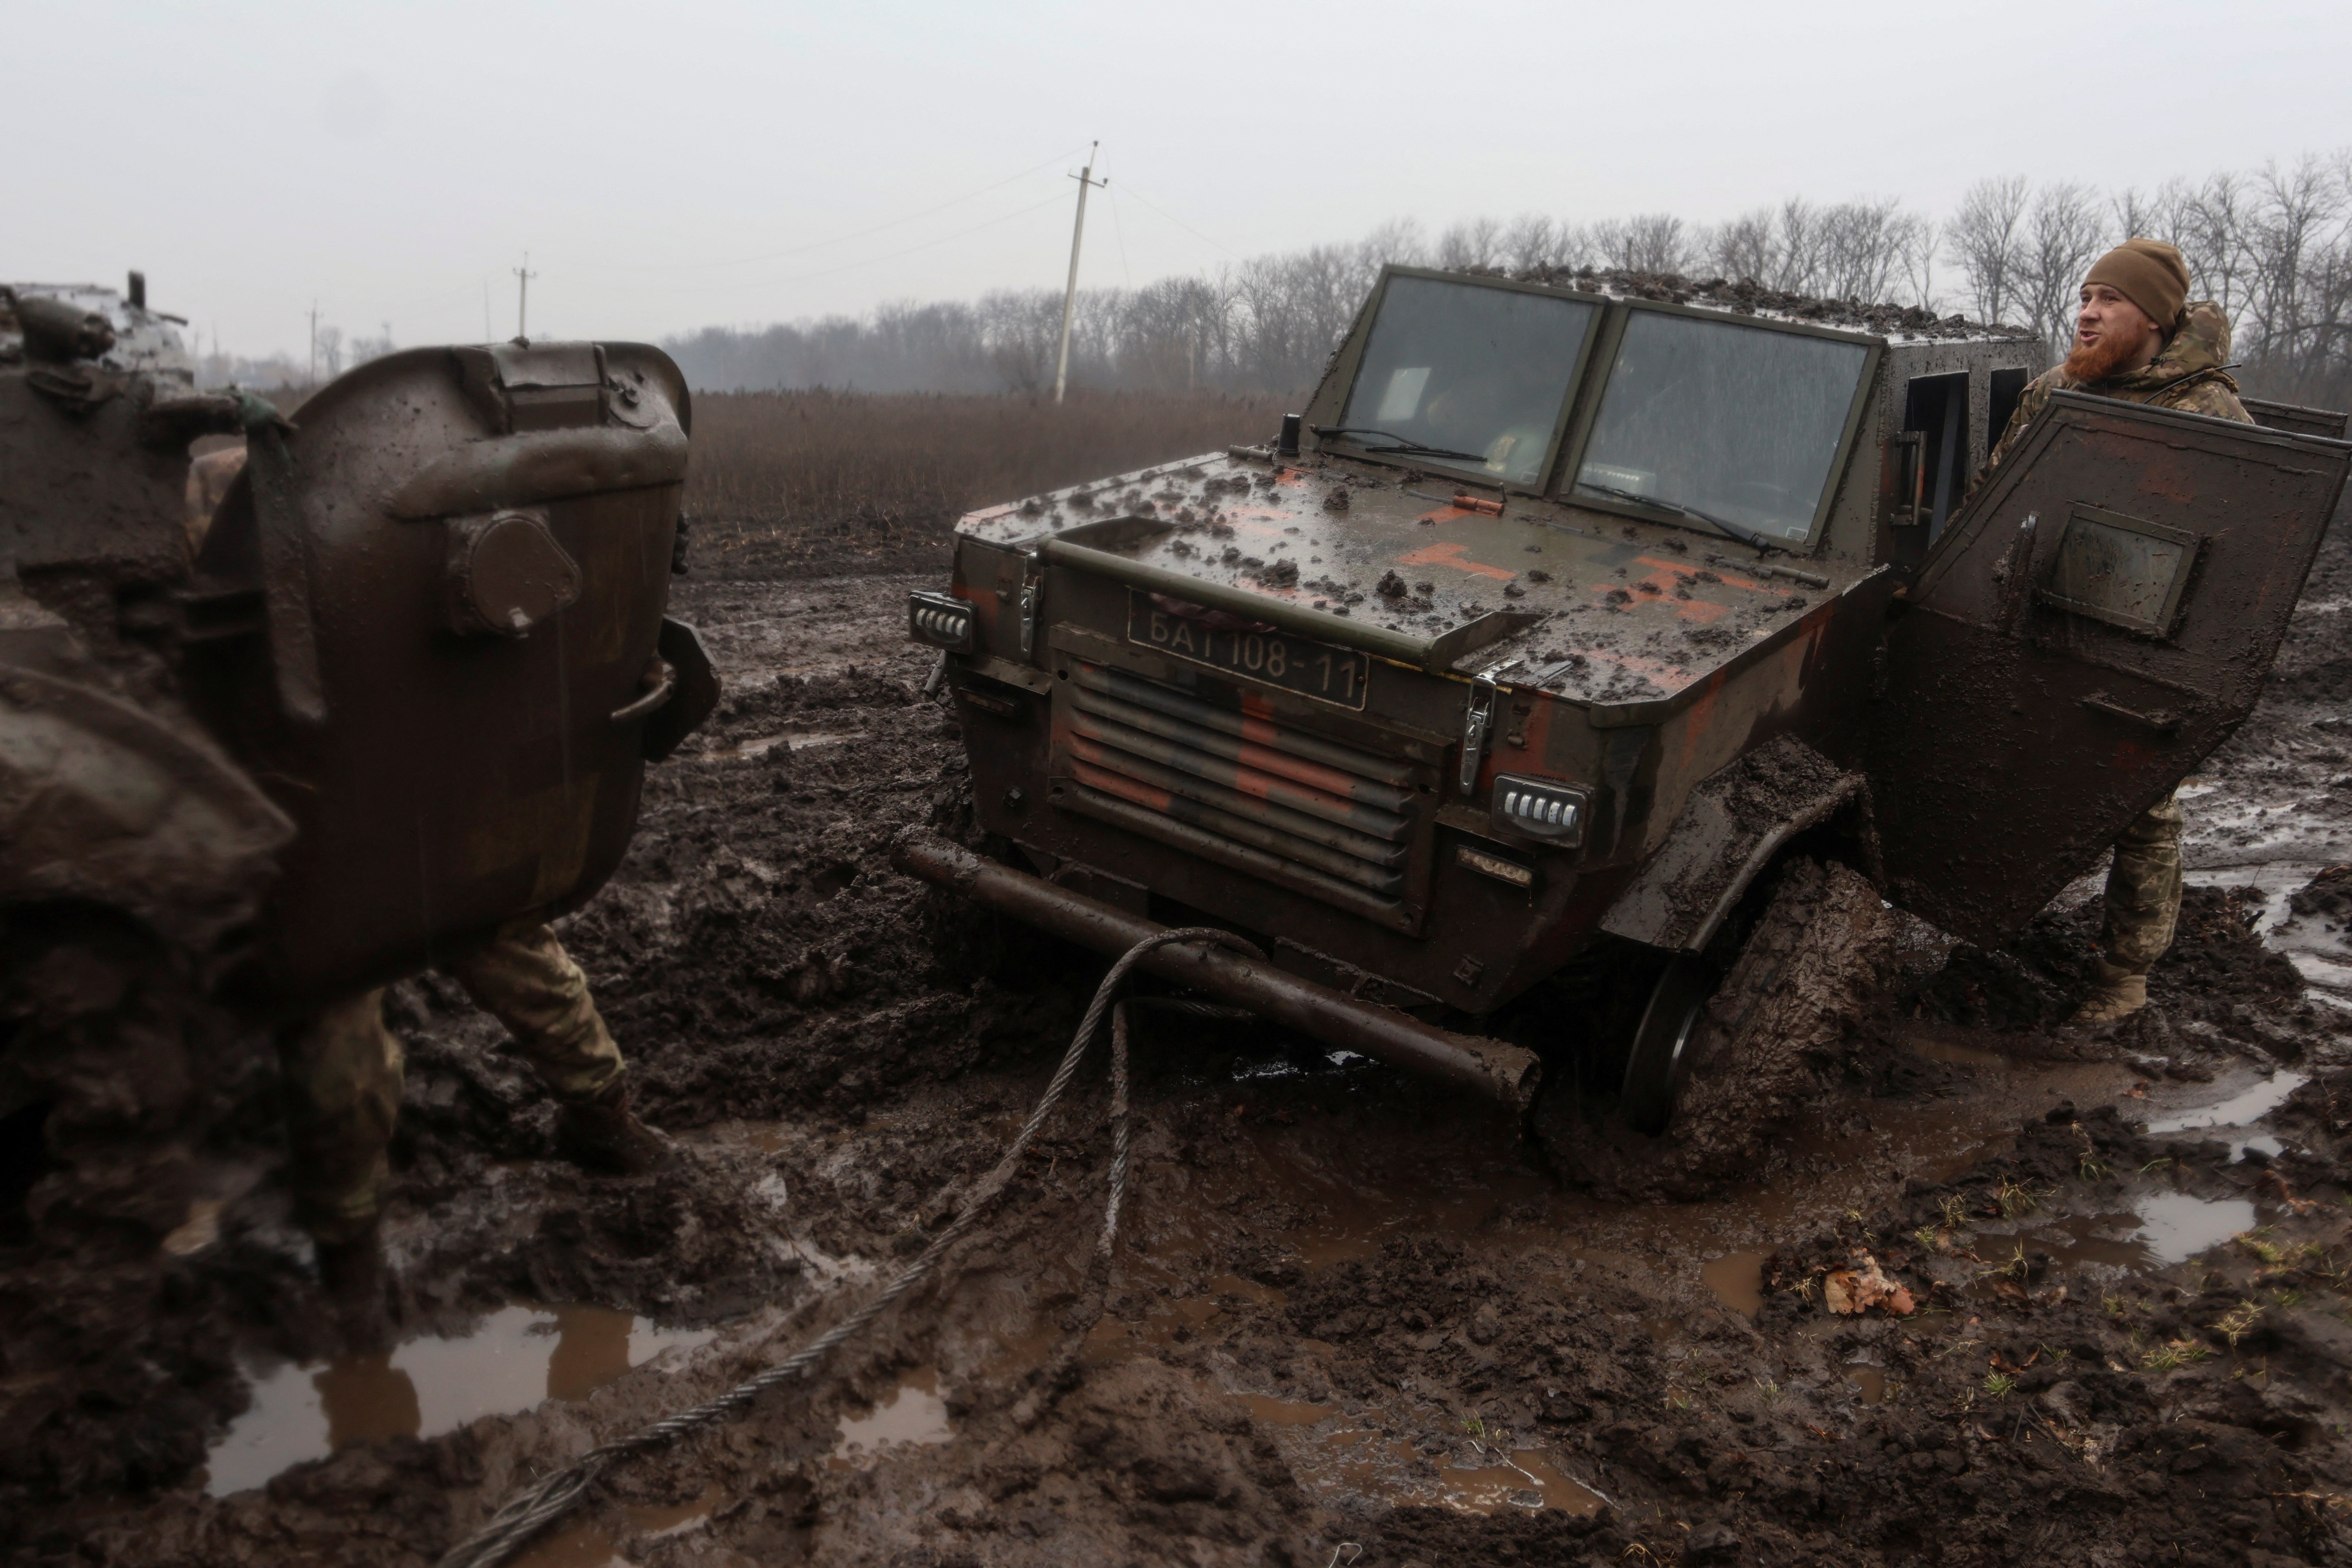 Ukrainian service members are seen next to armoured vehicles near the frontline town of Bakhmut